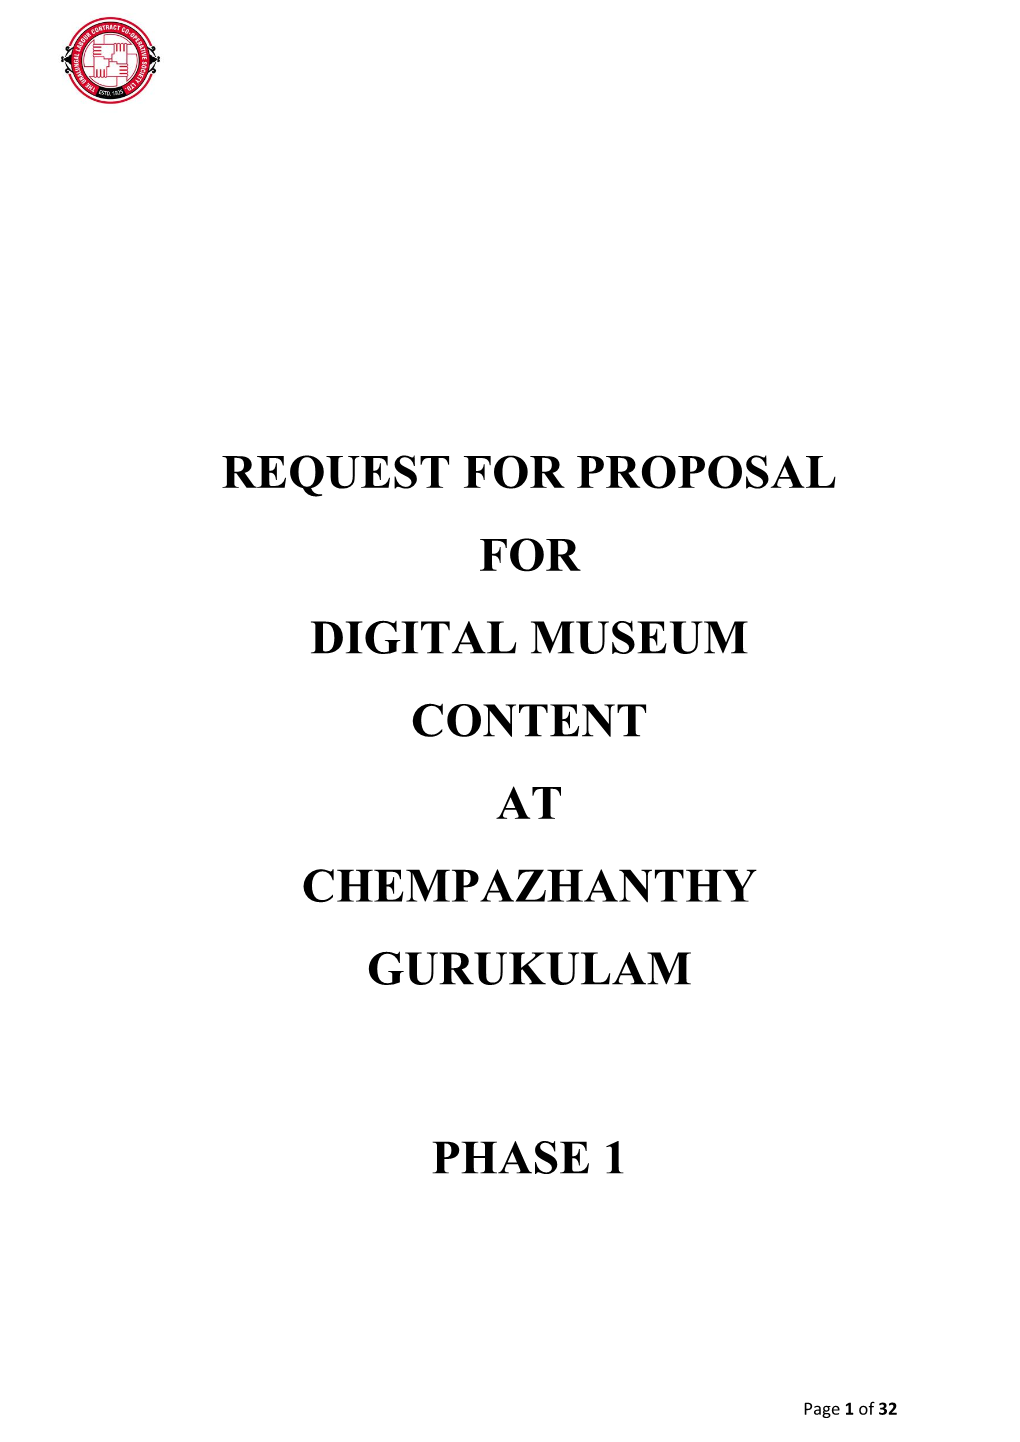 Request for Proposal for Digital Museum Content at Chempazhanthy Gurukulam Phase 1